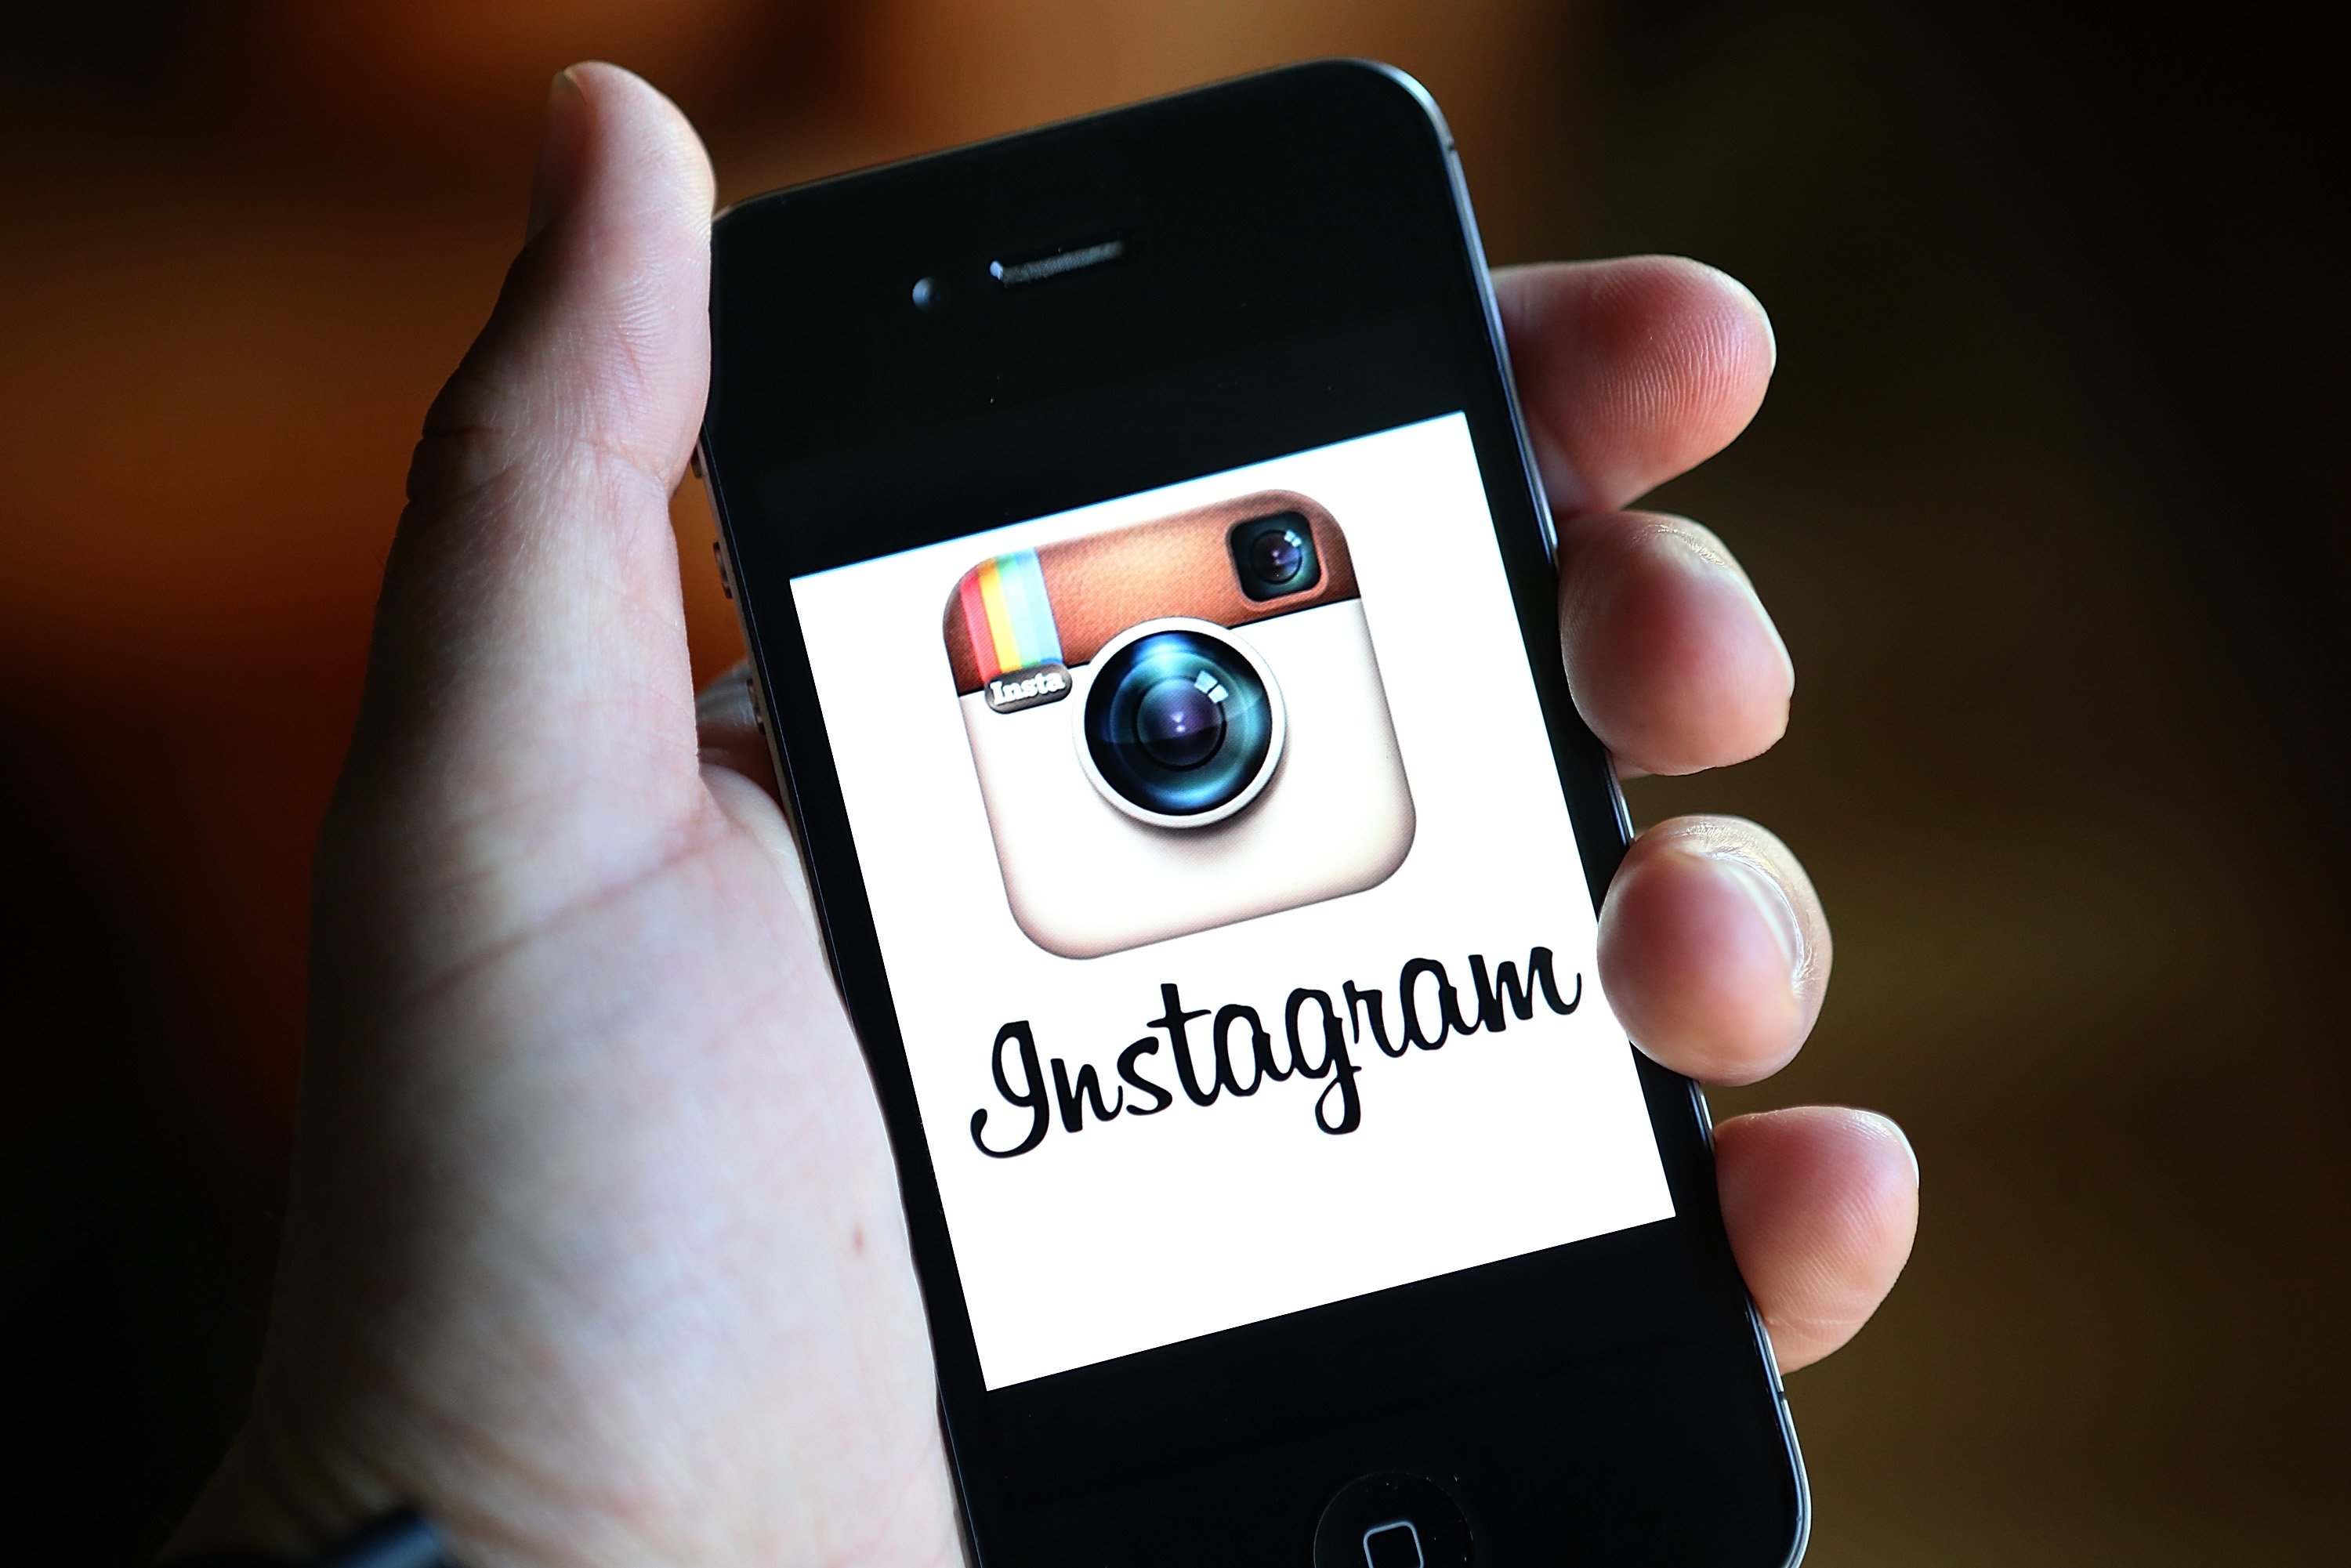 The Instagram logo is displayed on an Apple iPhone on Dec. 18, 2012 in Fairfax, Calif. (Justin Sullivan&mdash;Getty Images)